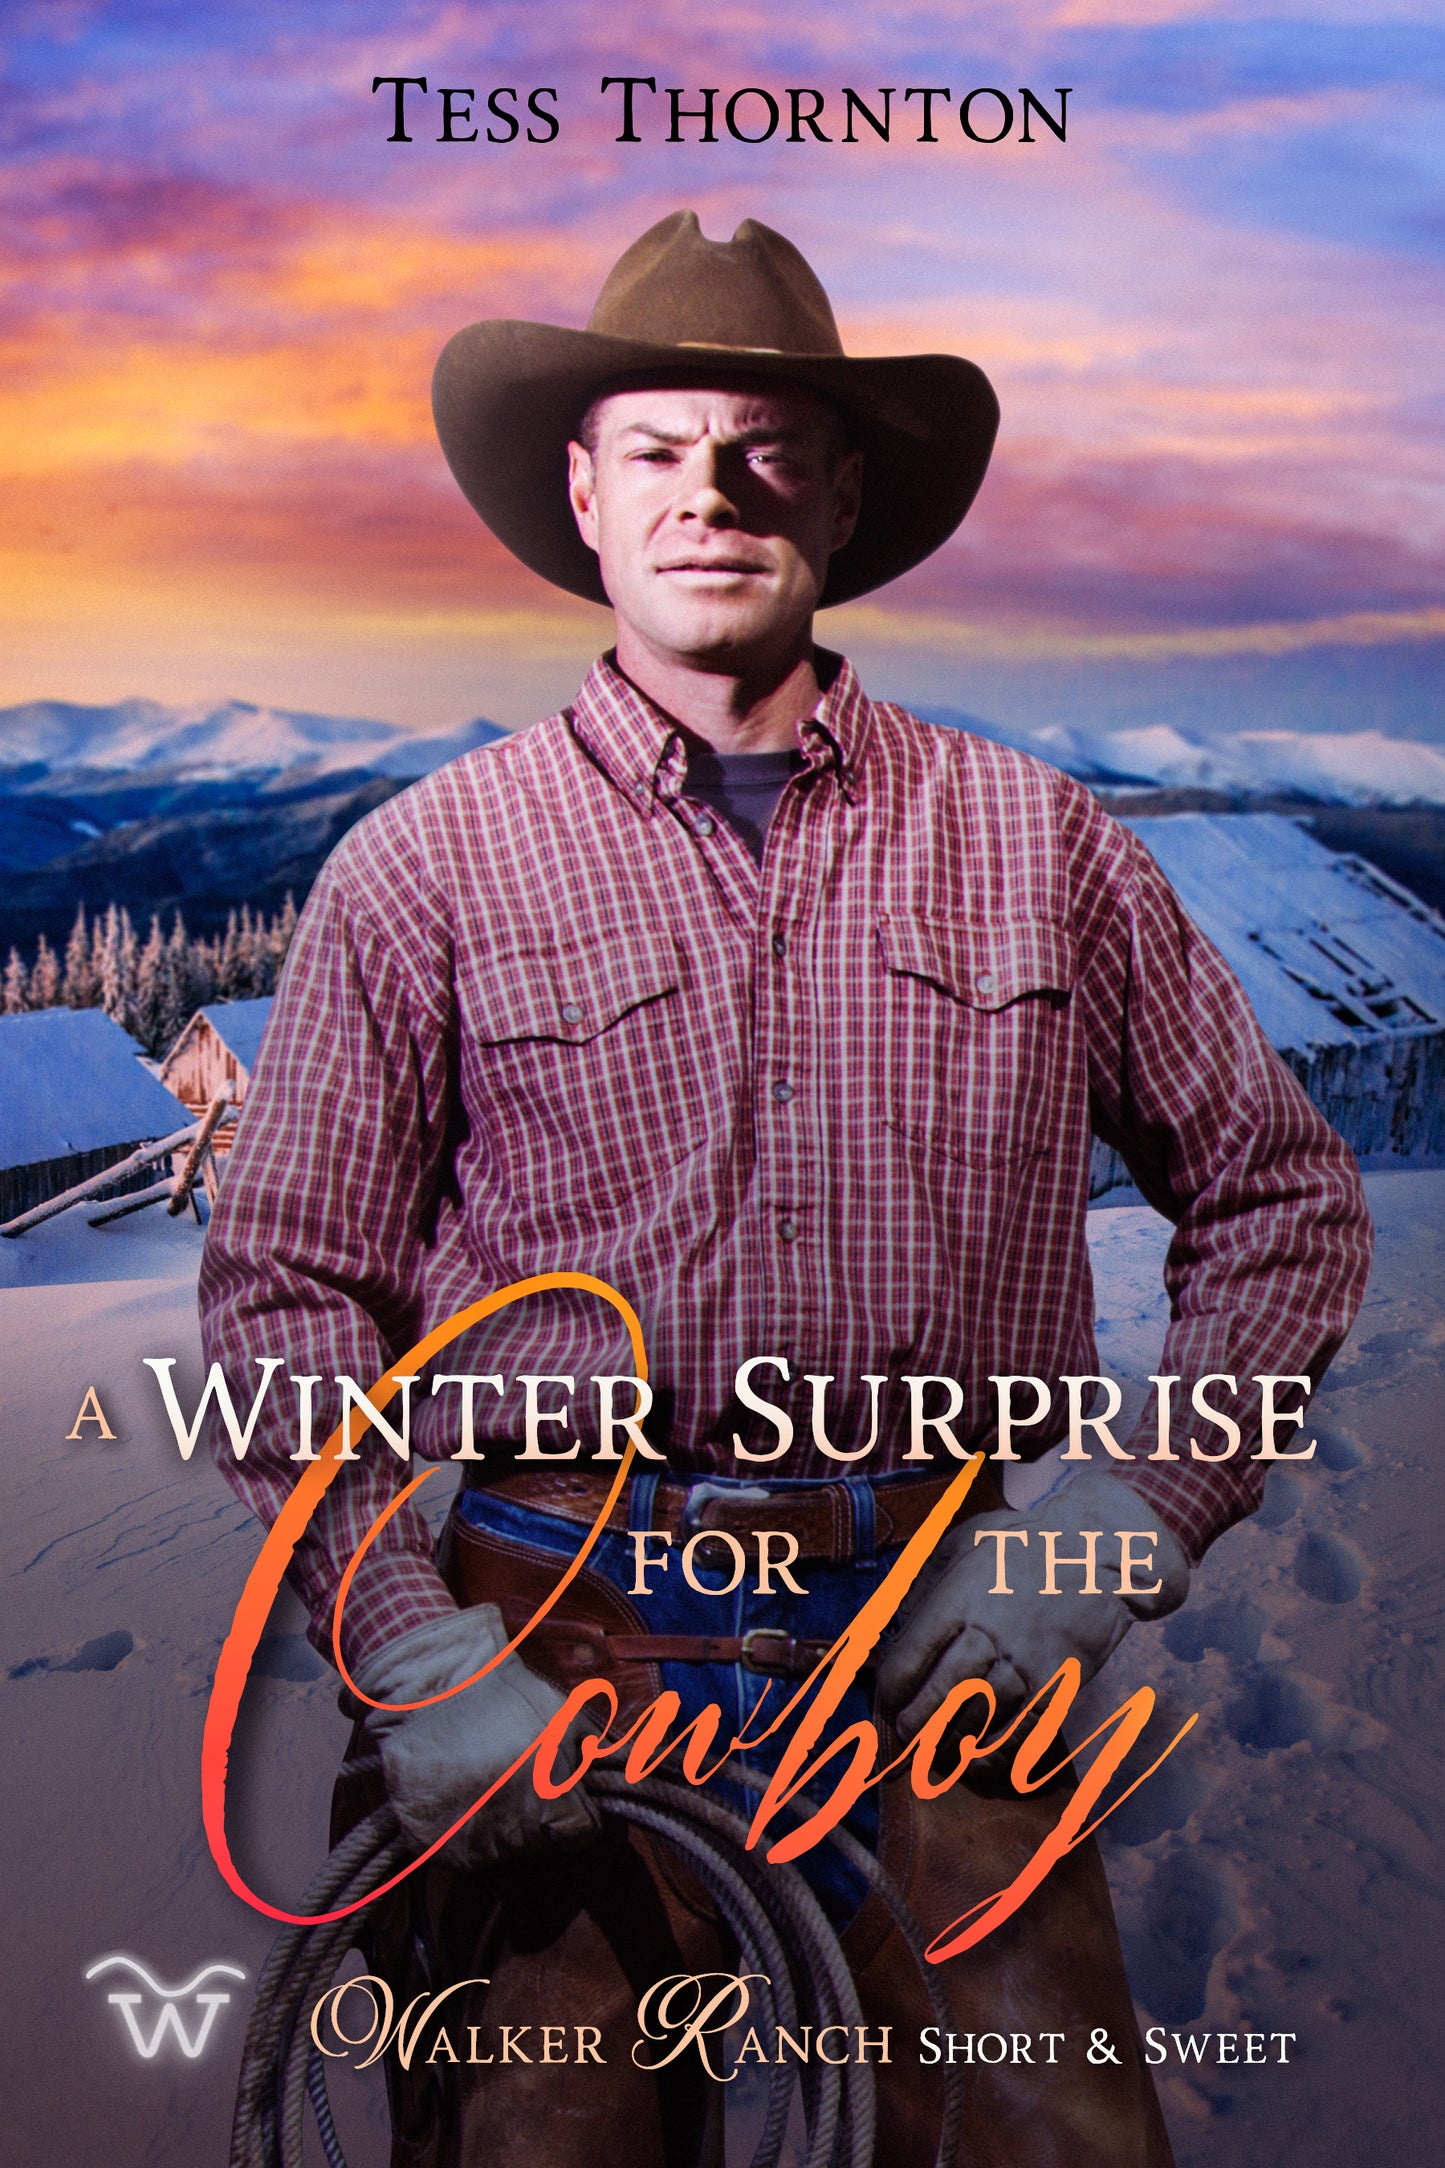 A Winter Surprise for the Cowboy